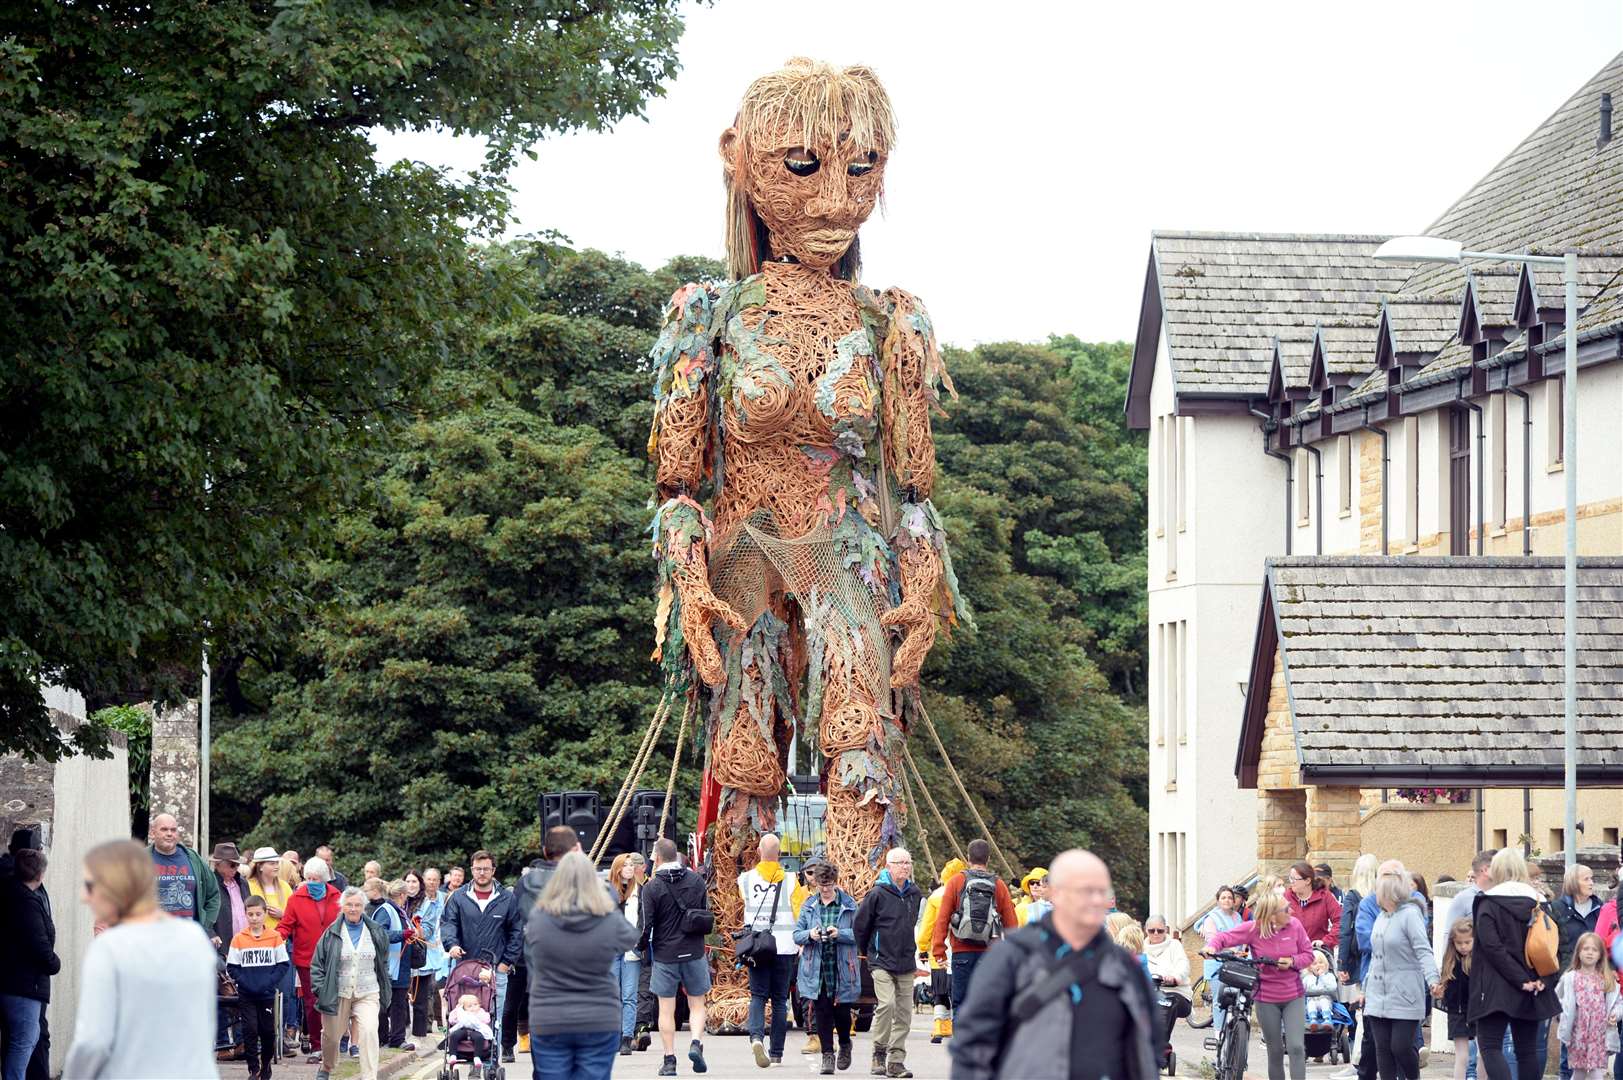 Storm the Giant visits Nairn 12 September 2021: Storm the giant.Picture: James Mackenzie.